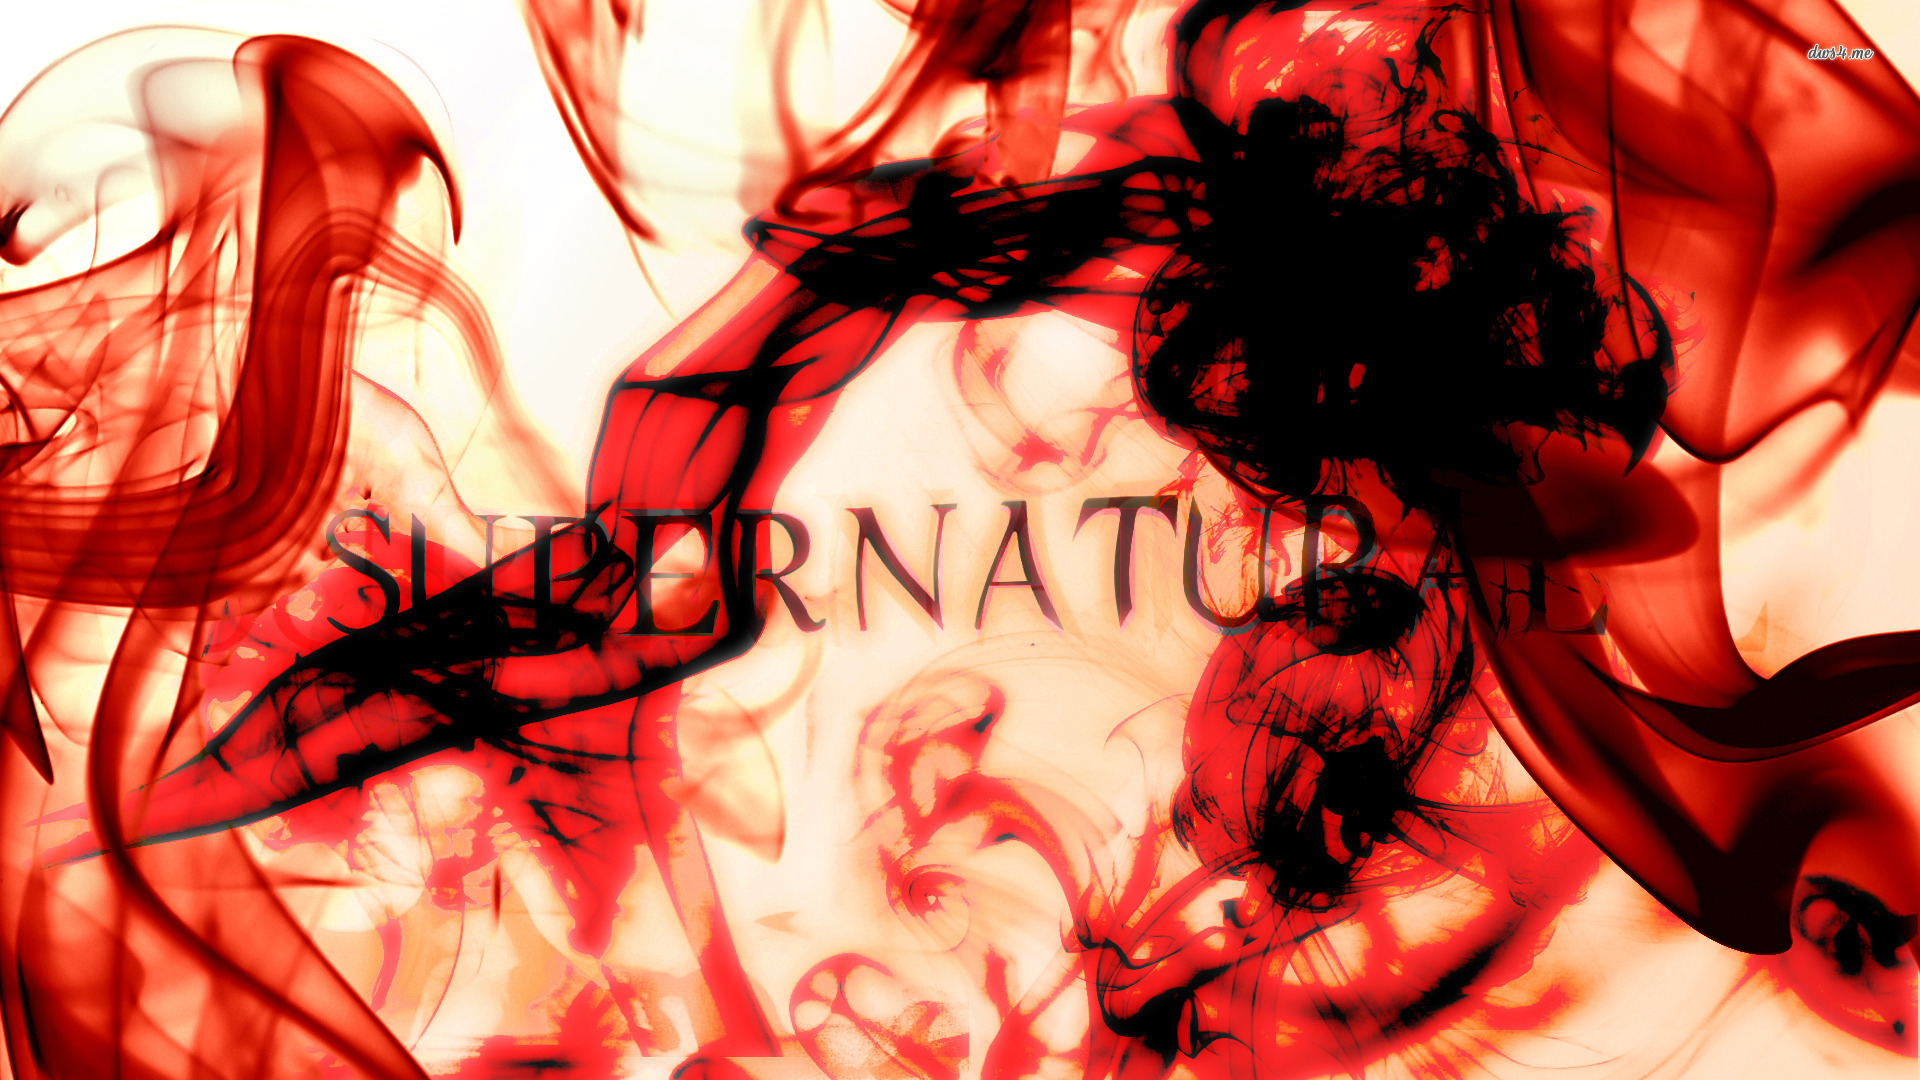 Featured image of post Supernatural Hd Wallpaper For Laptop Supernatural hd wallpaper posted in people wallpapers category and wallpaper original resolution is 1920x1200 px